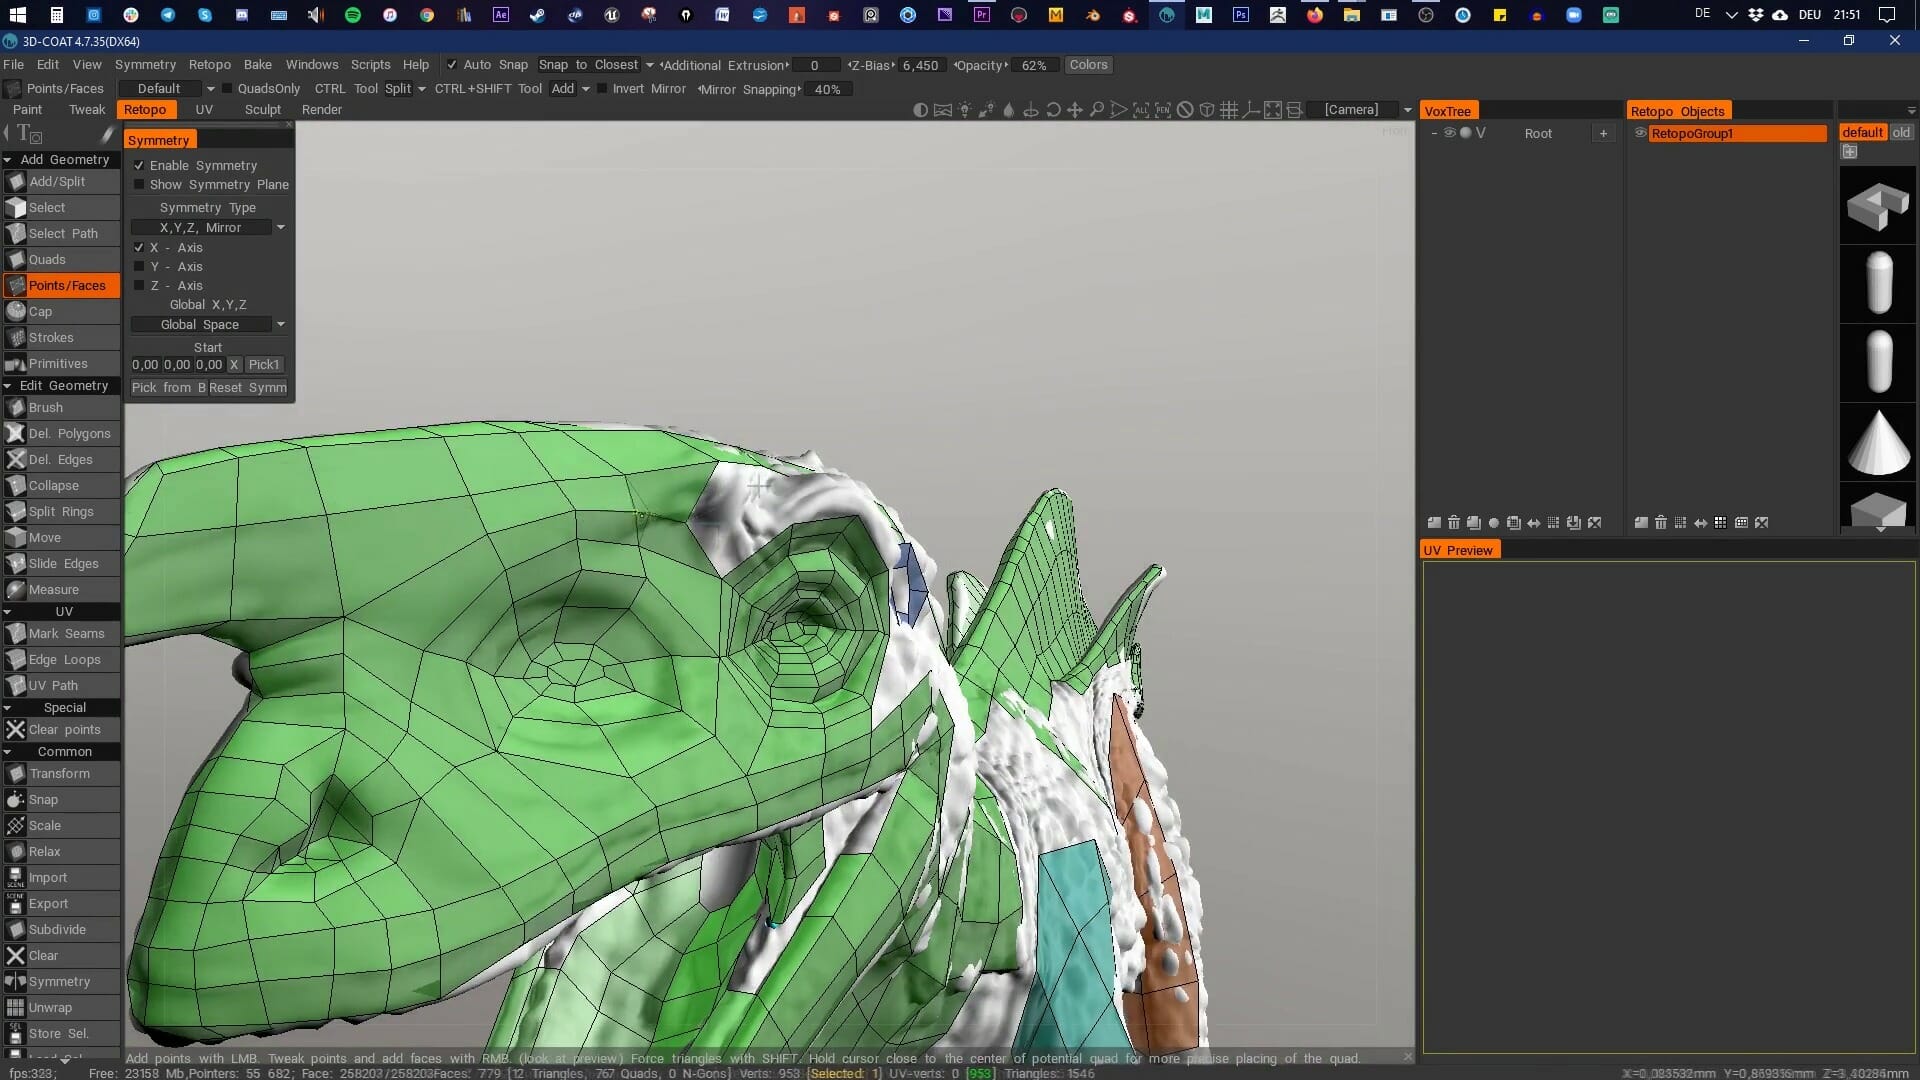 Modeling and Sculpting a Dinosaur by: FlippedNormals, 3D Models by Daz 3D